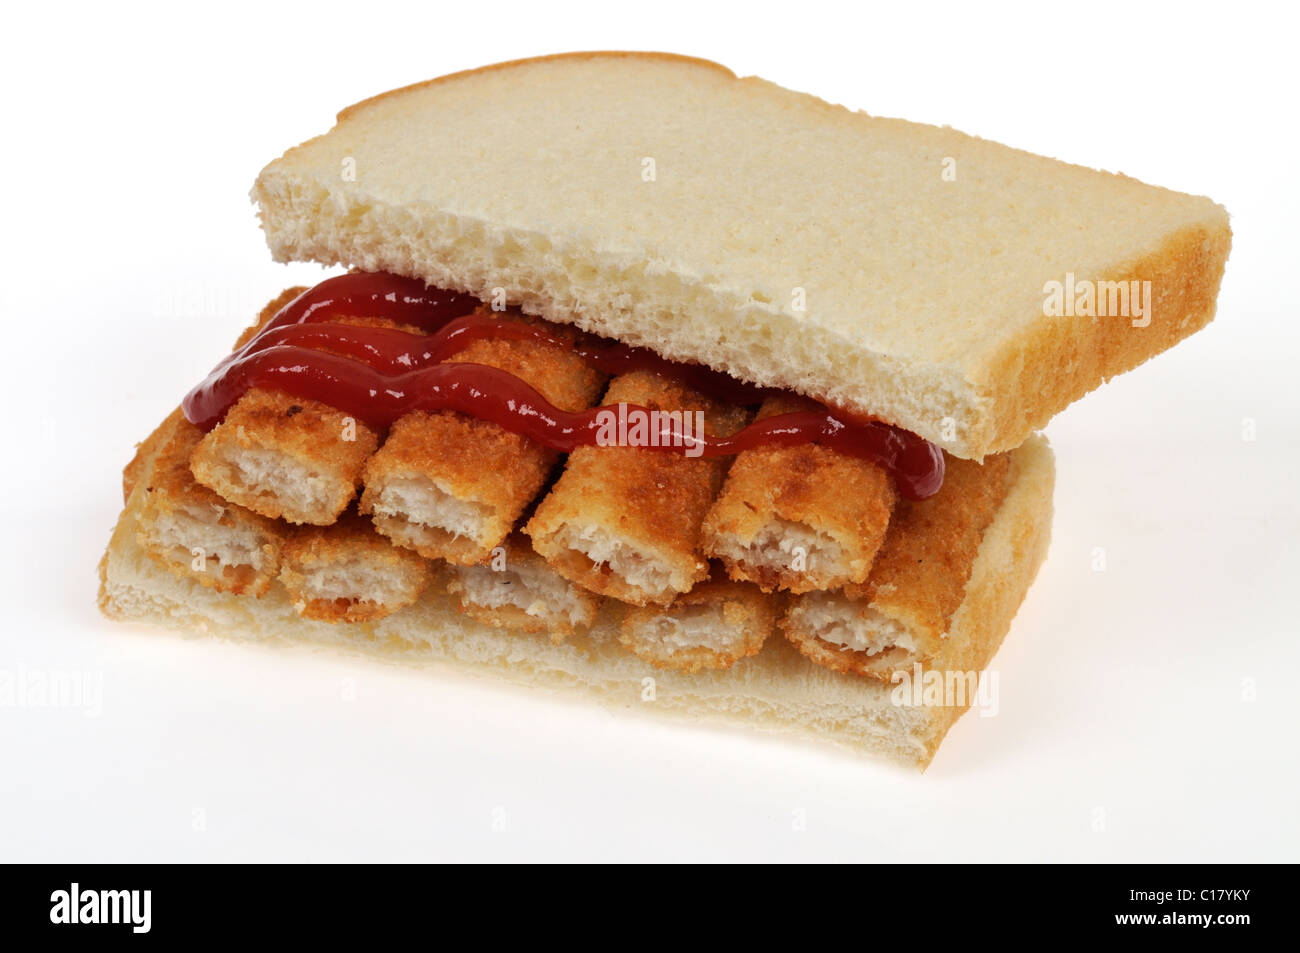 Fish finger sandwich with white bread and ketchup on white